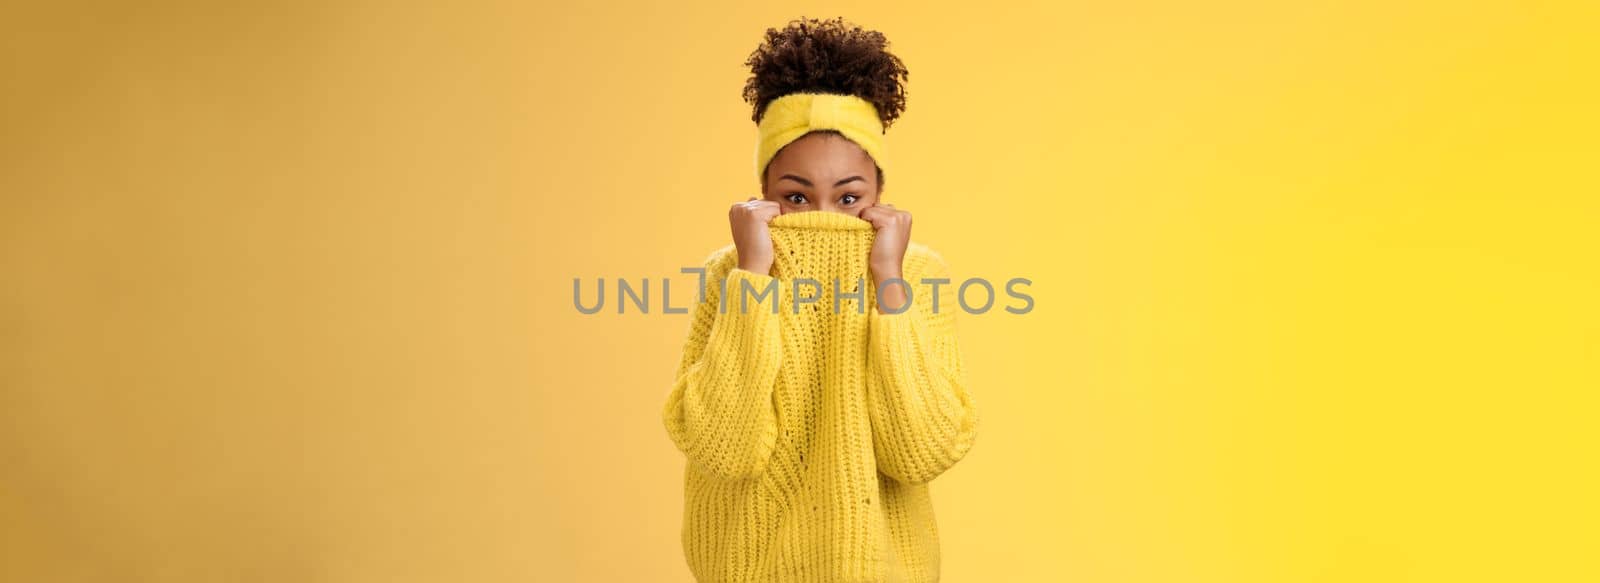 Charming cute silly young african-american modern girl. pulling sweater on face hiding peeking camera playfully having fun smiling hide-n-seek fool around mimicking standing yellow background.